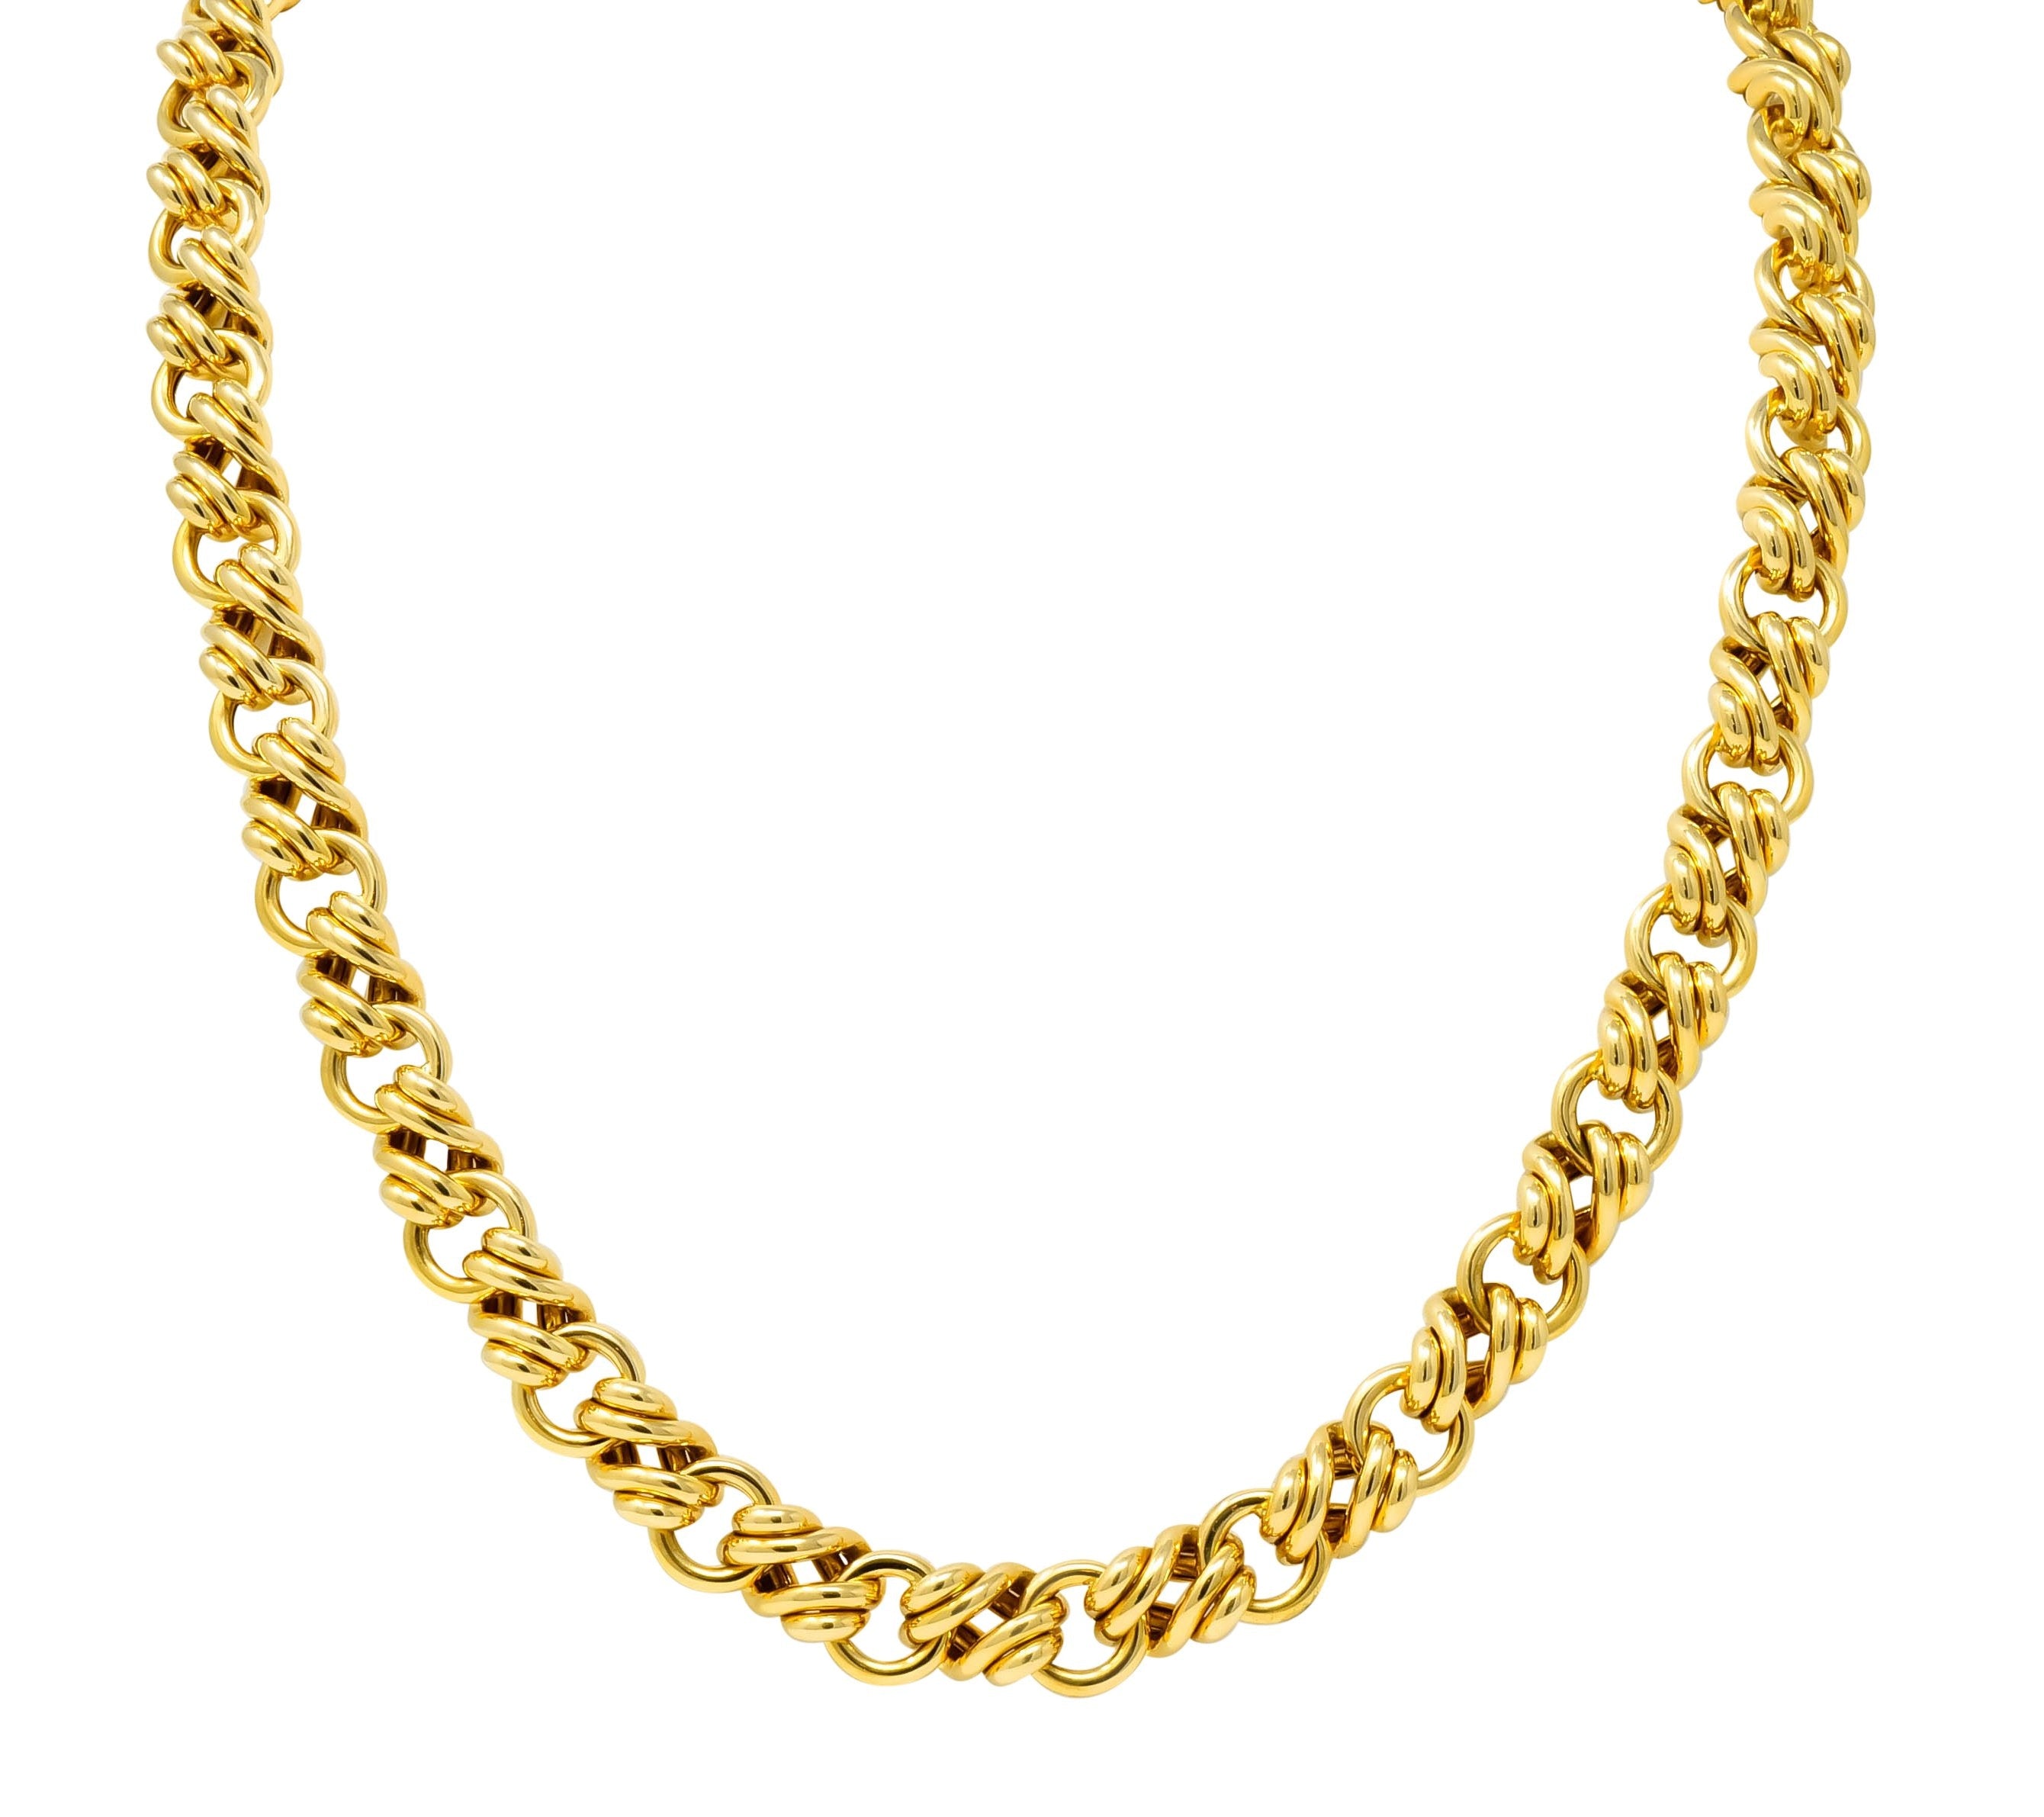 Tiffany & Co. Vintage 18 Karat Yellow Gold Substantially Linked Chain ...